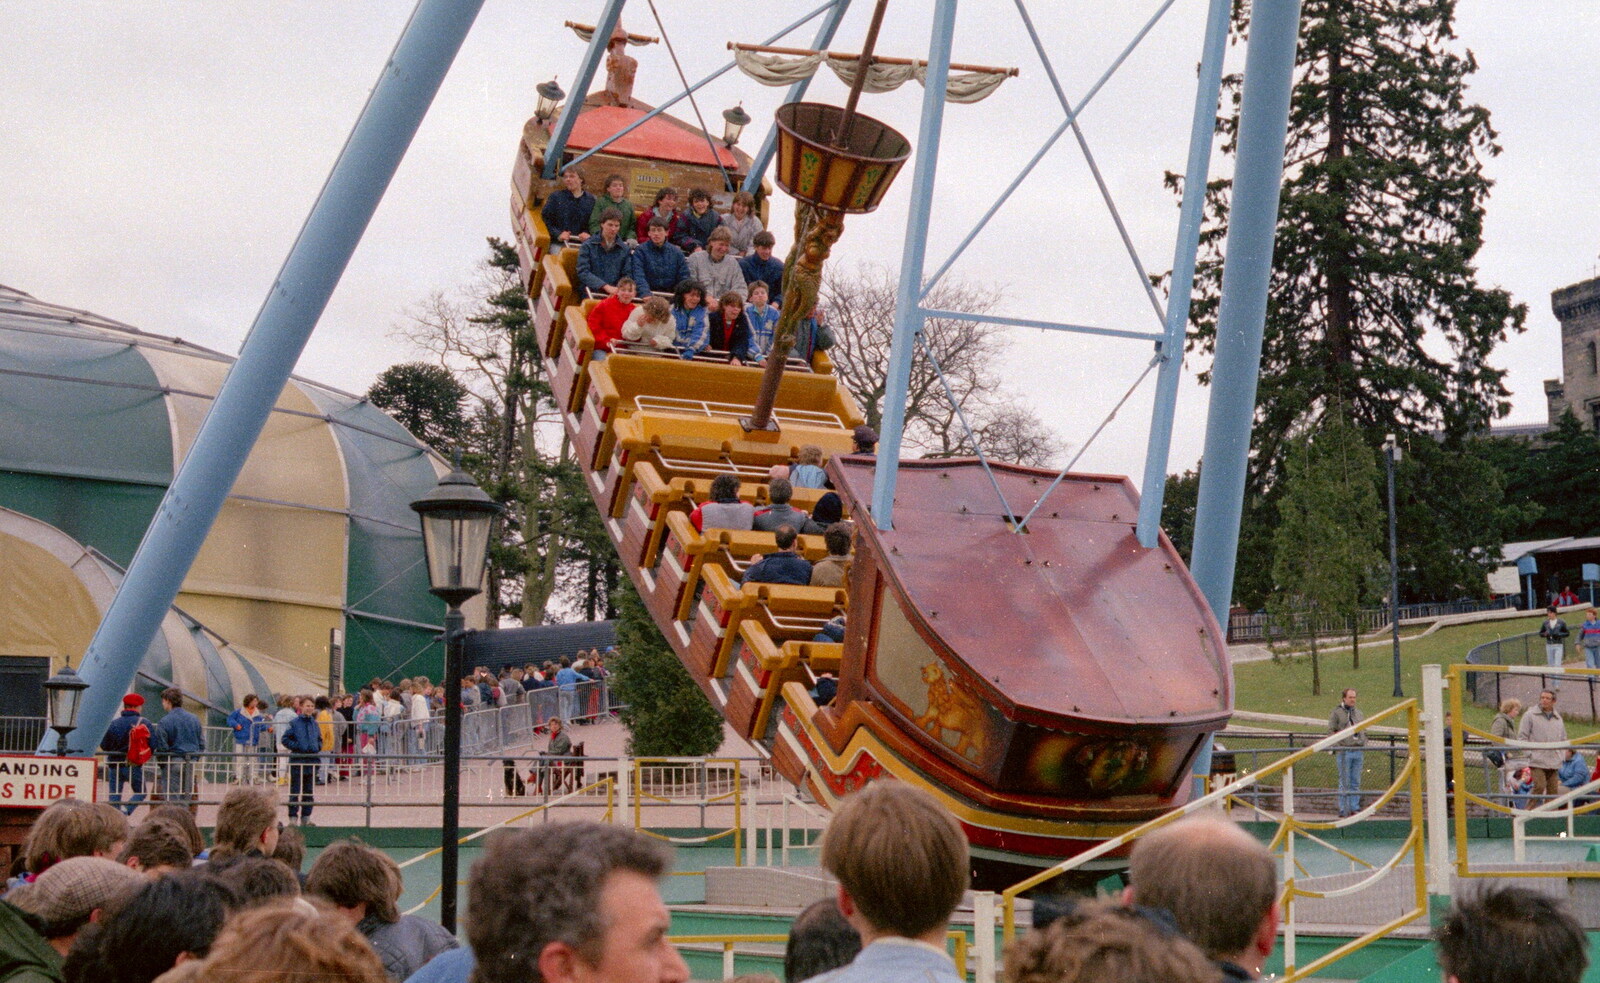 Pirate ship action from Easter With Sean in Macclesfield, Cheshire - 6th April 1986